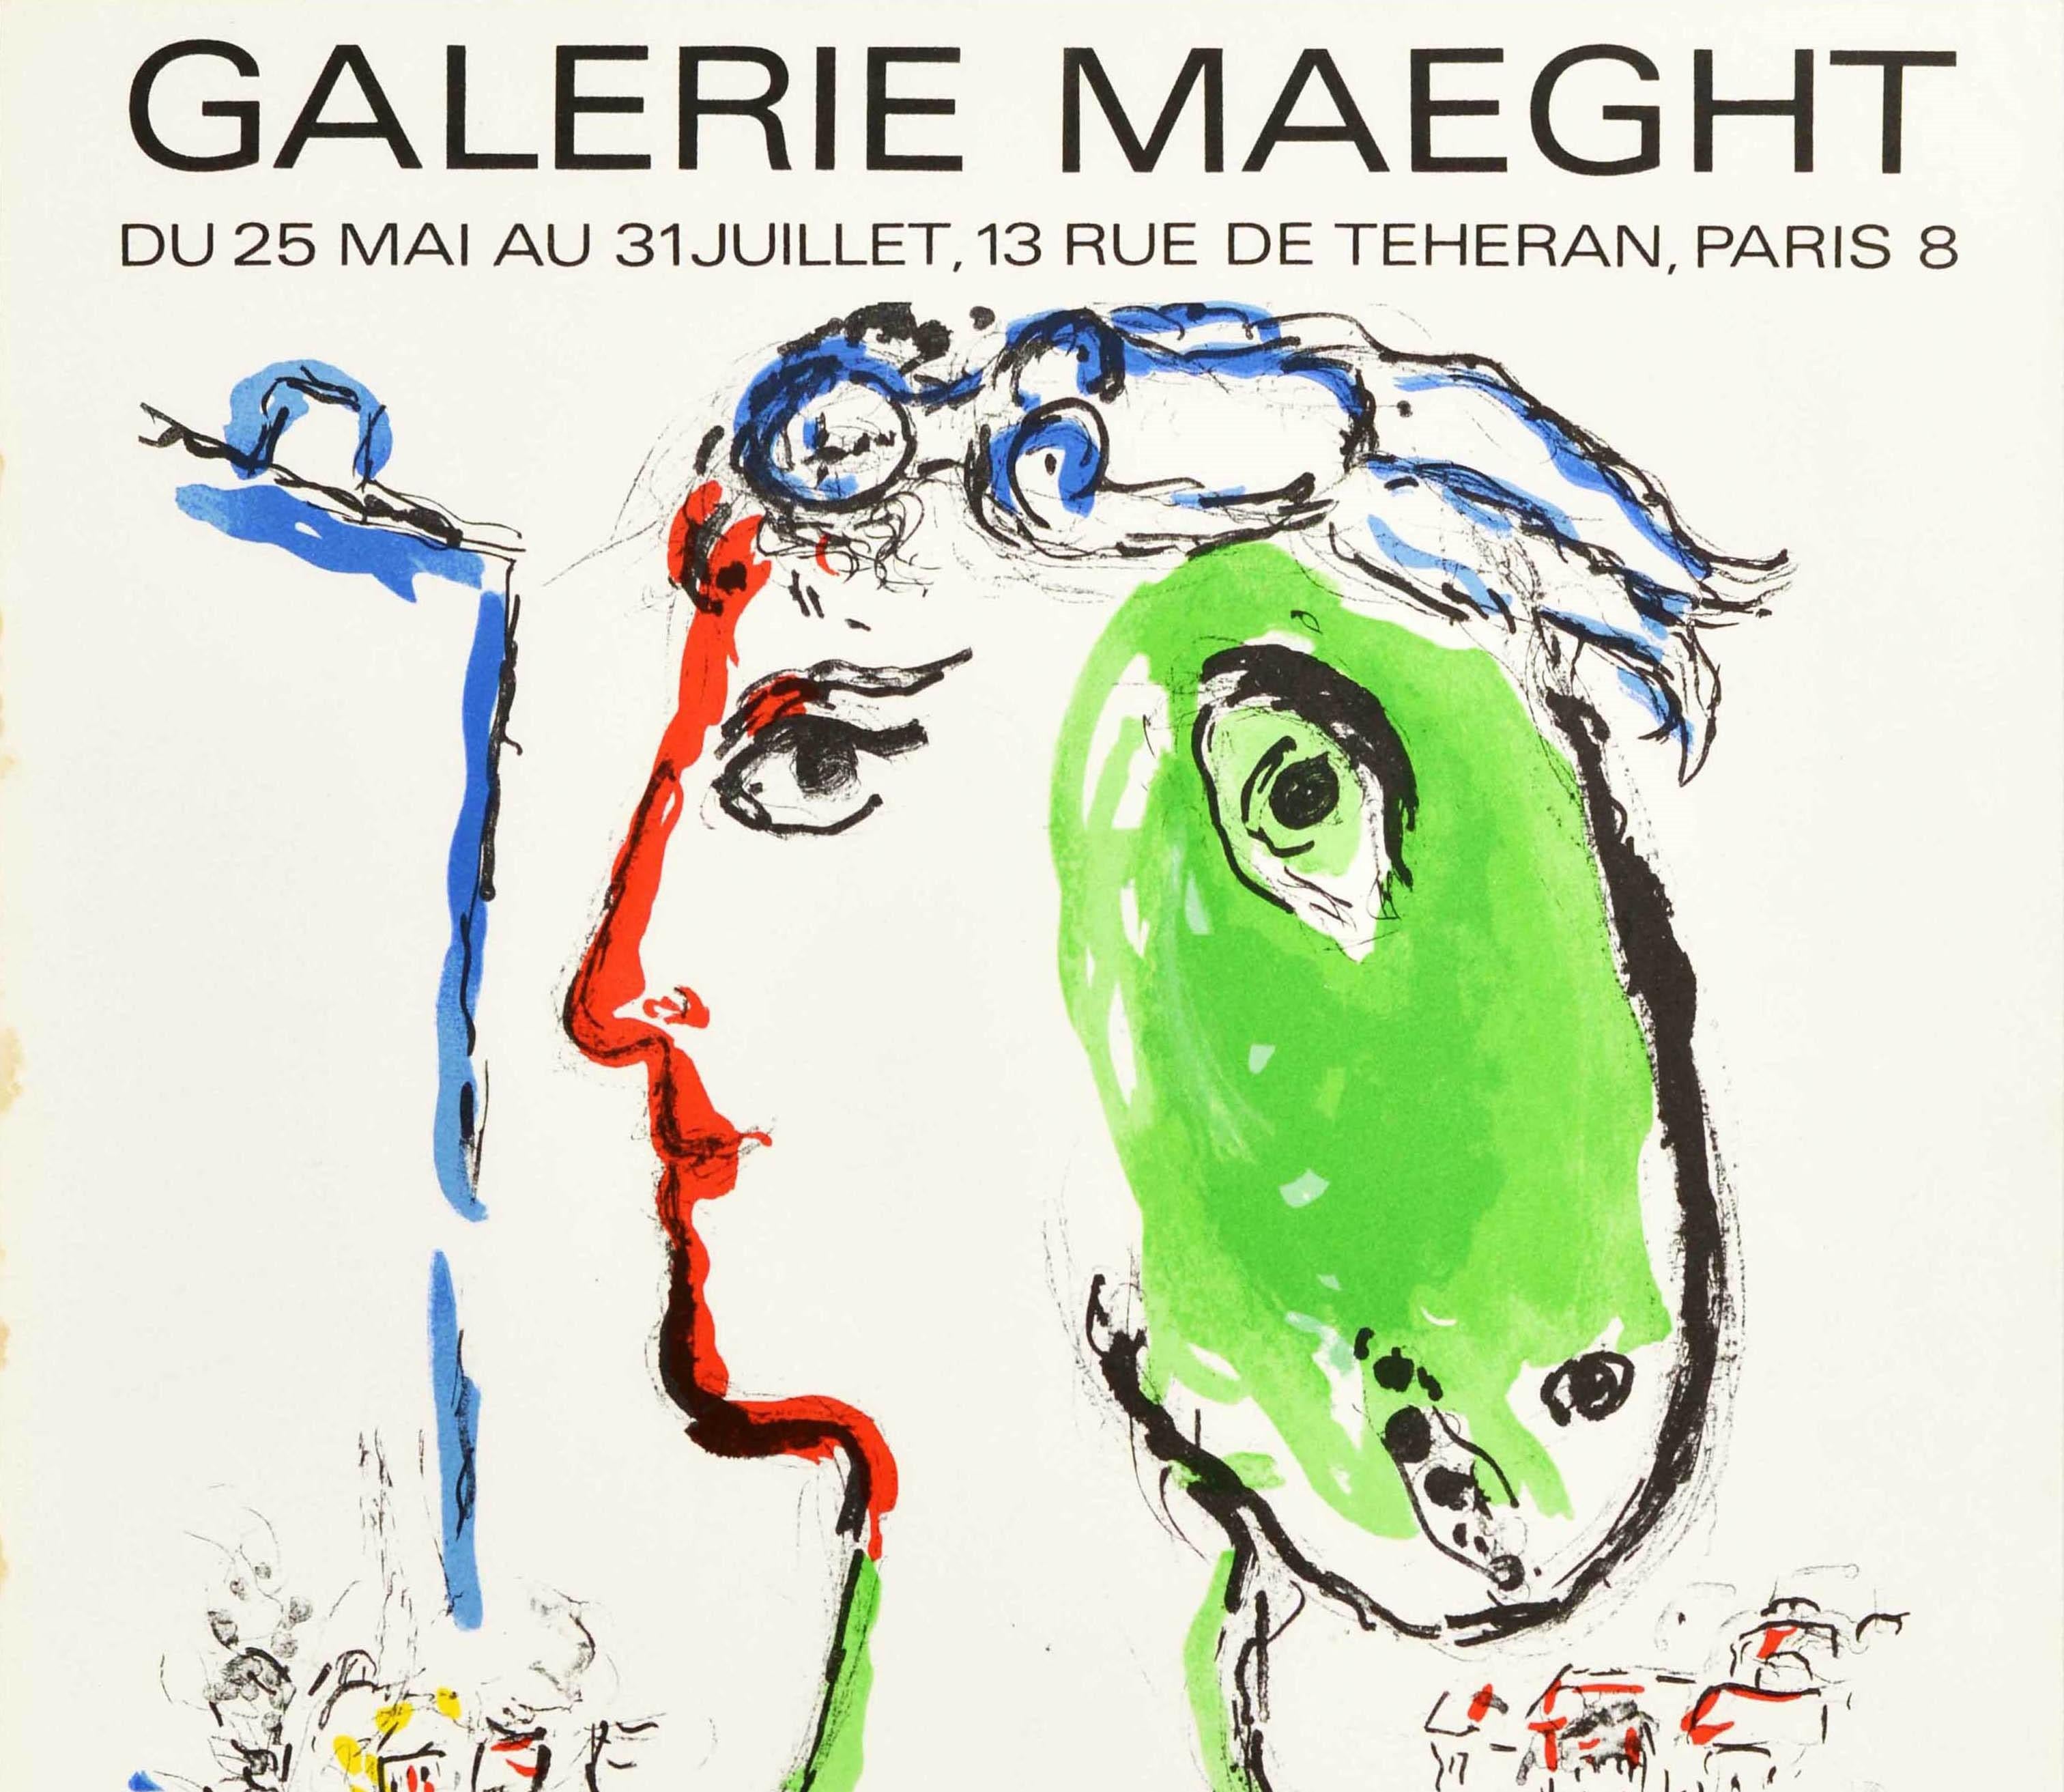 Original Vintage Exhibition Poster Chagall Galerie Maeght Artist As A Phoenix - Print by Marc Chagall